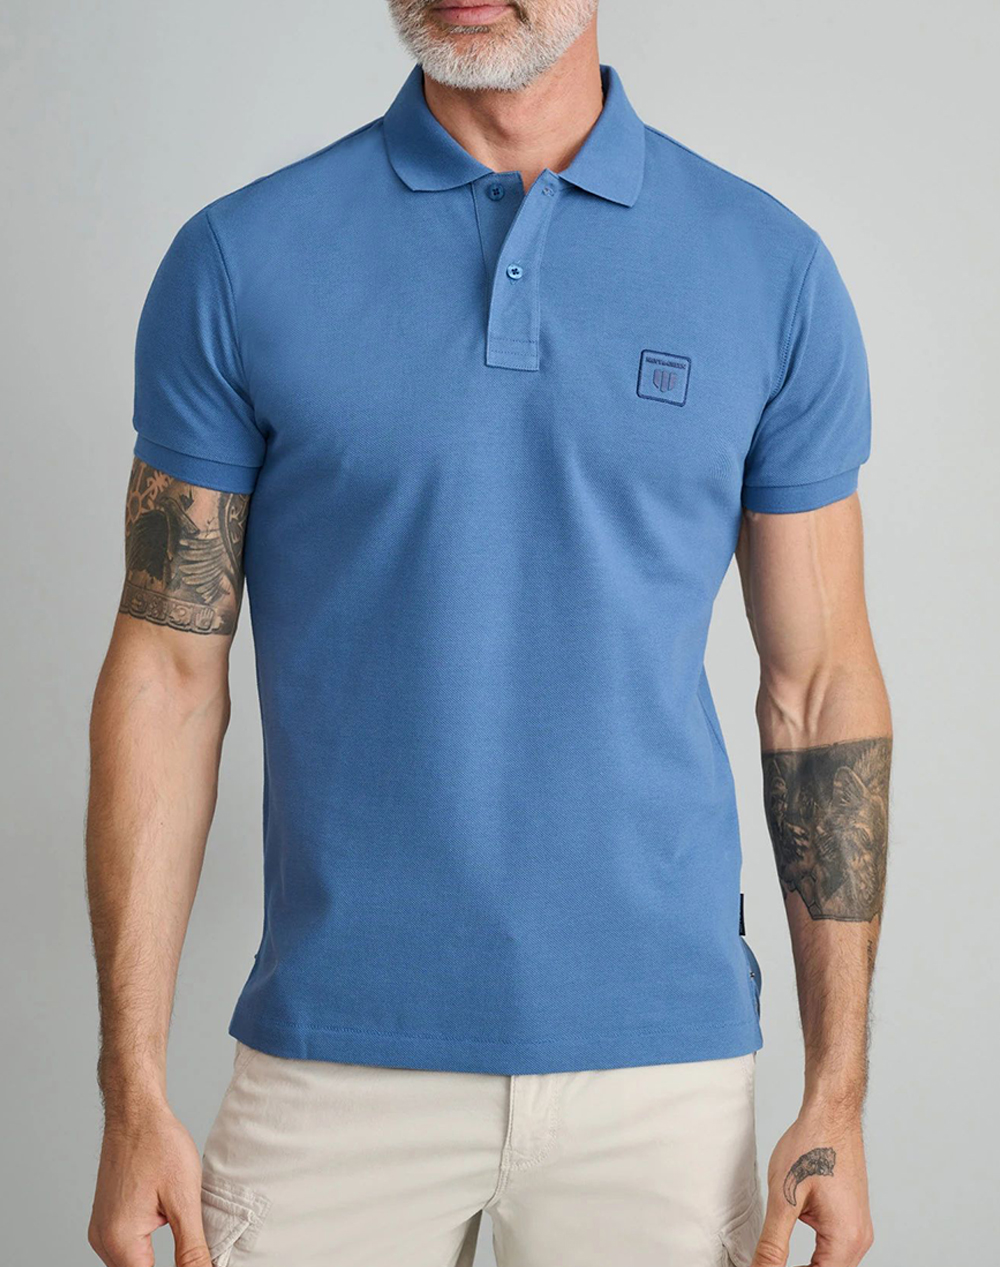 NAVY&GREEN POLO ΜΠΛΟΥΖΑΚΙ 24GE.1017/YL-BLUE STONE SteelBlue